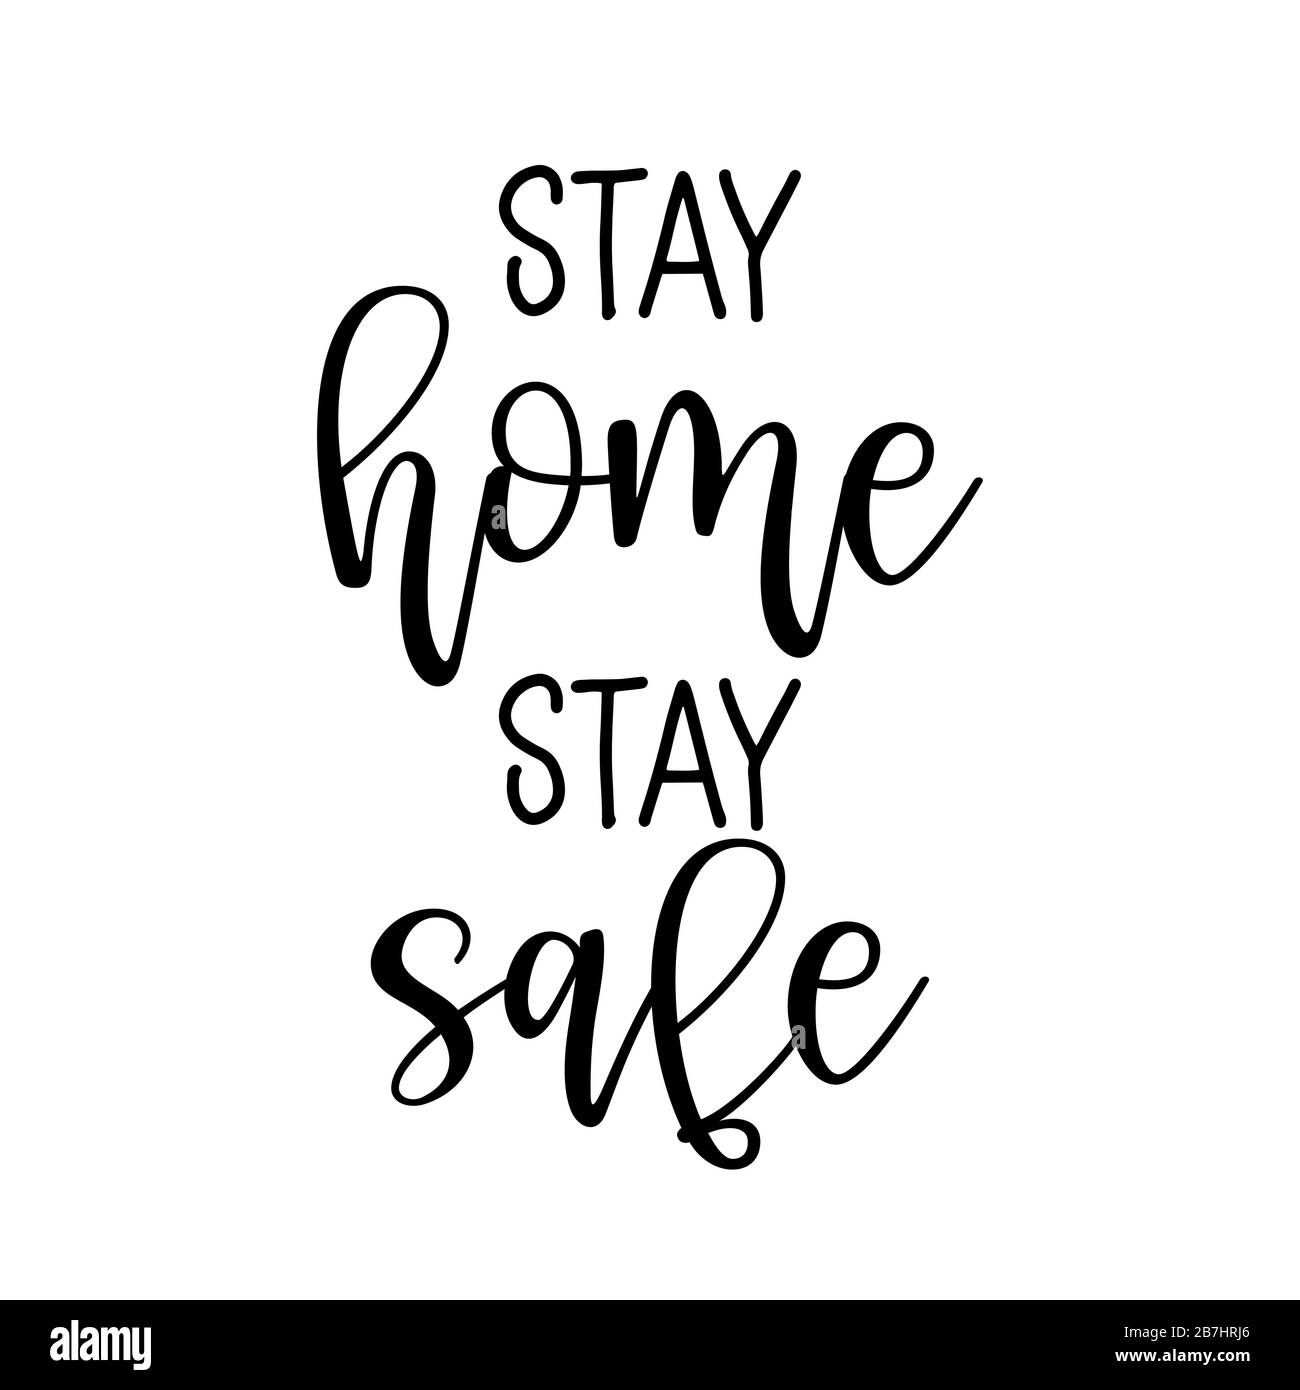 Stay home, stay safe - Lettering typography poster with text for self quarine times. Hand letter script motivation sign catch word art design. Vintage Stock Vector